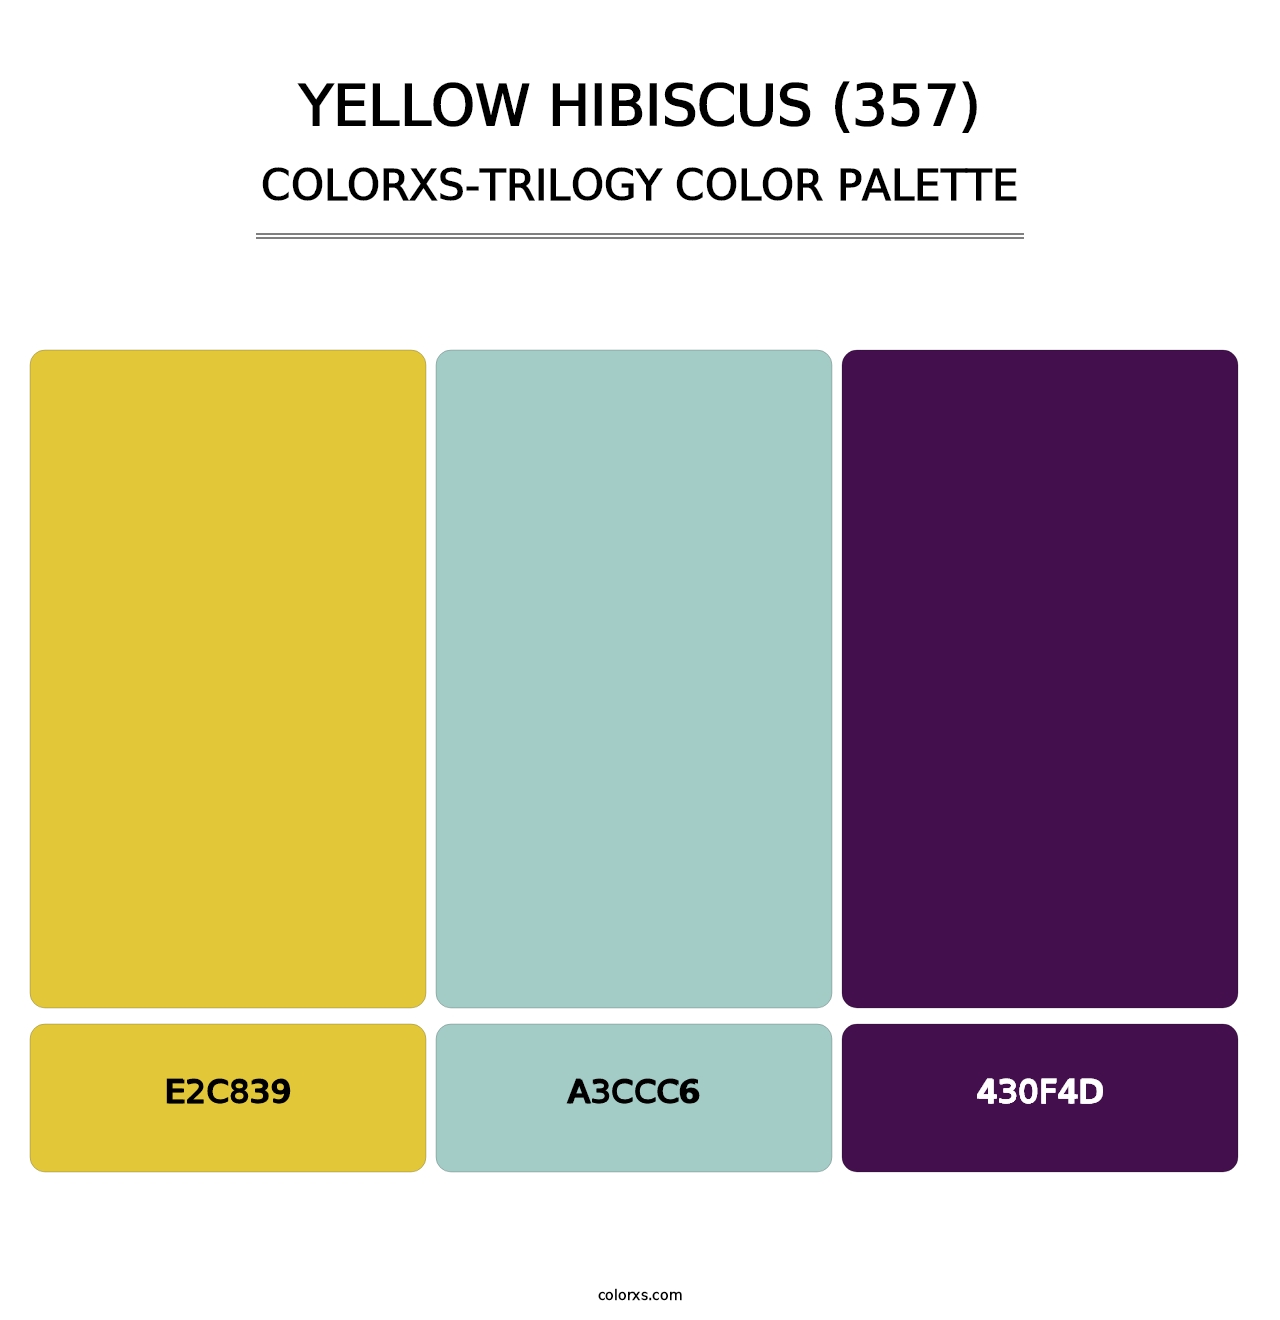 Yellow Hibiscus (357) - Colorxs Trilogy Palette